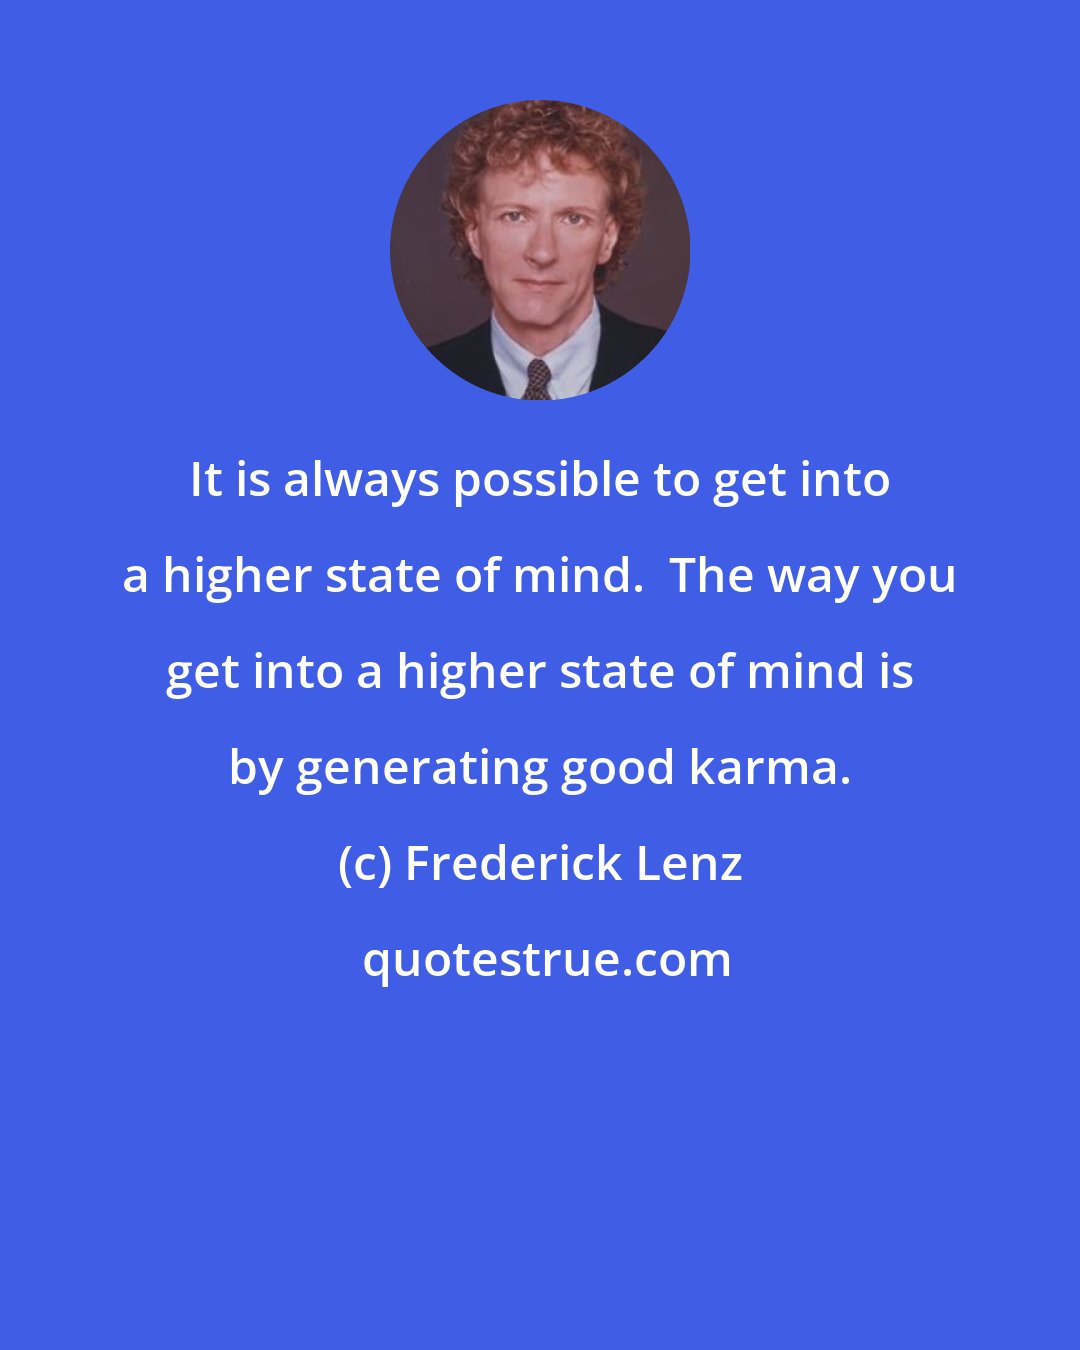 Frederick Lenz: It is always possible to get into a higher state of mind.  The way you get into a higher state of mind is by generating good karma.